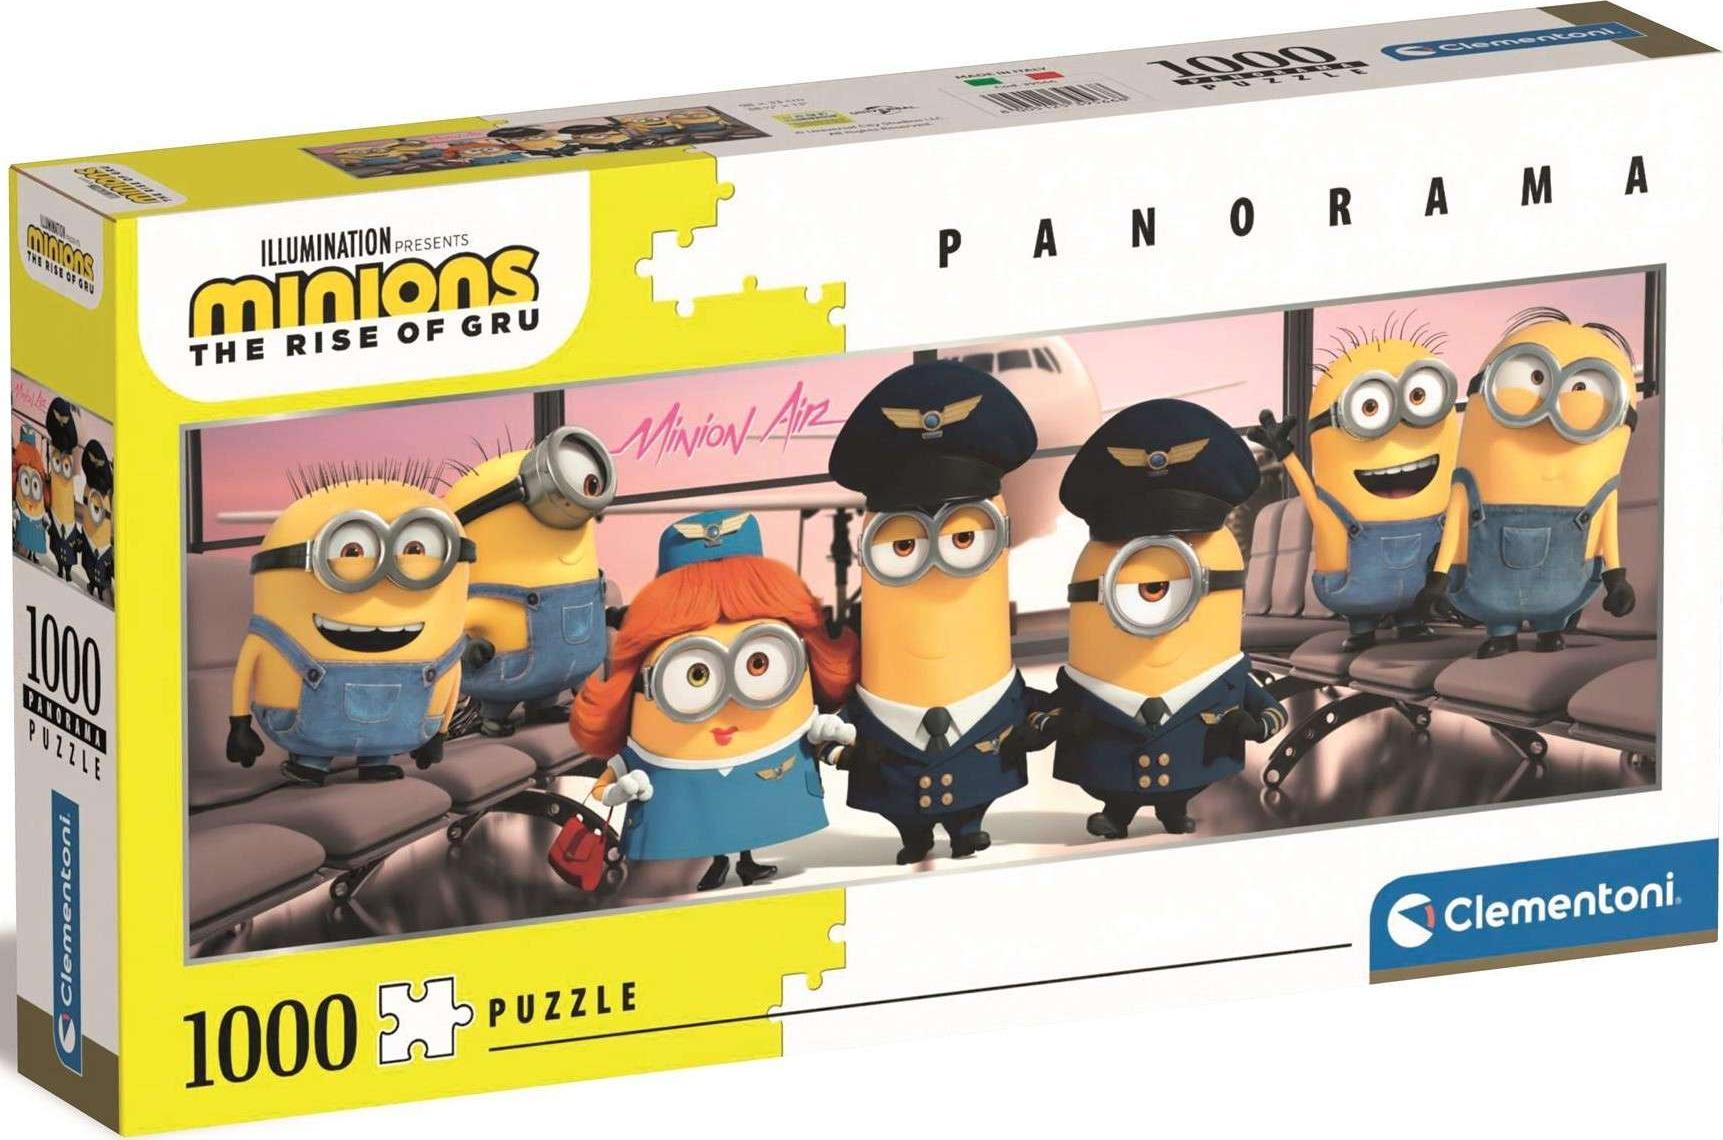 Puzzle Clementoni High Quality Collection, Panorama - Minions, The rise of Gru, 1000 piese